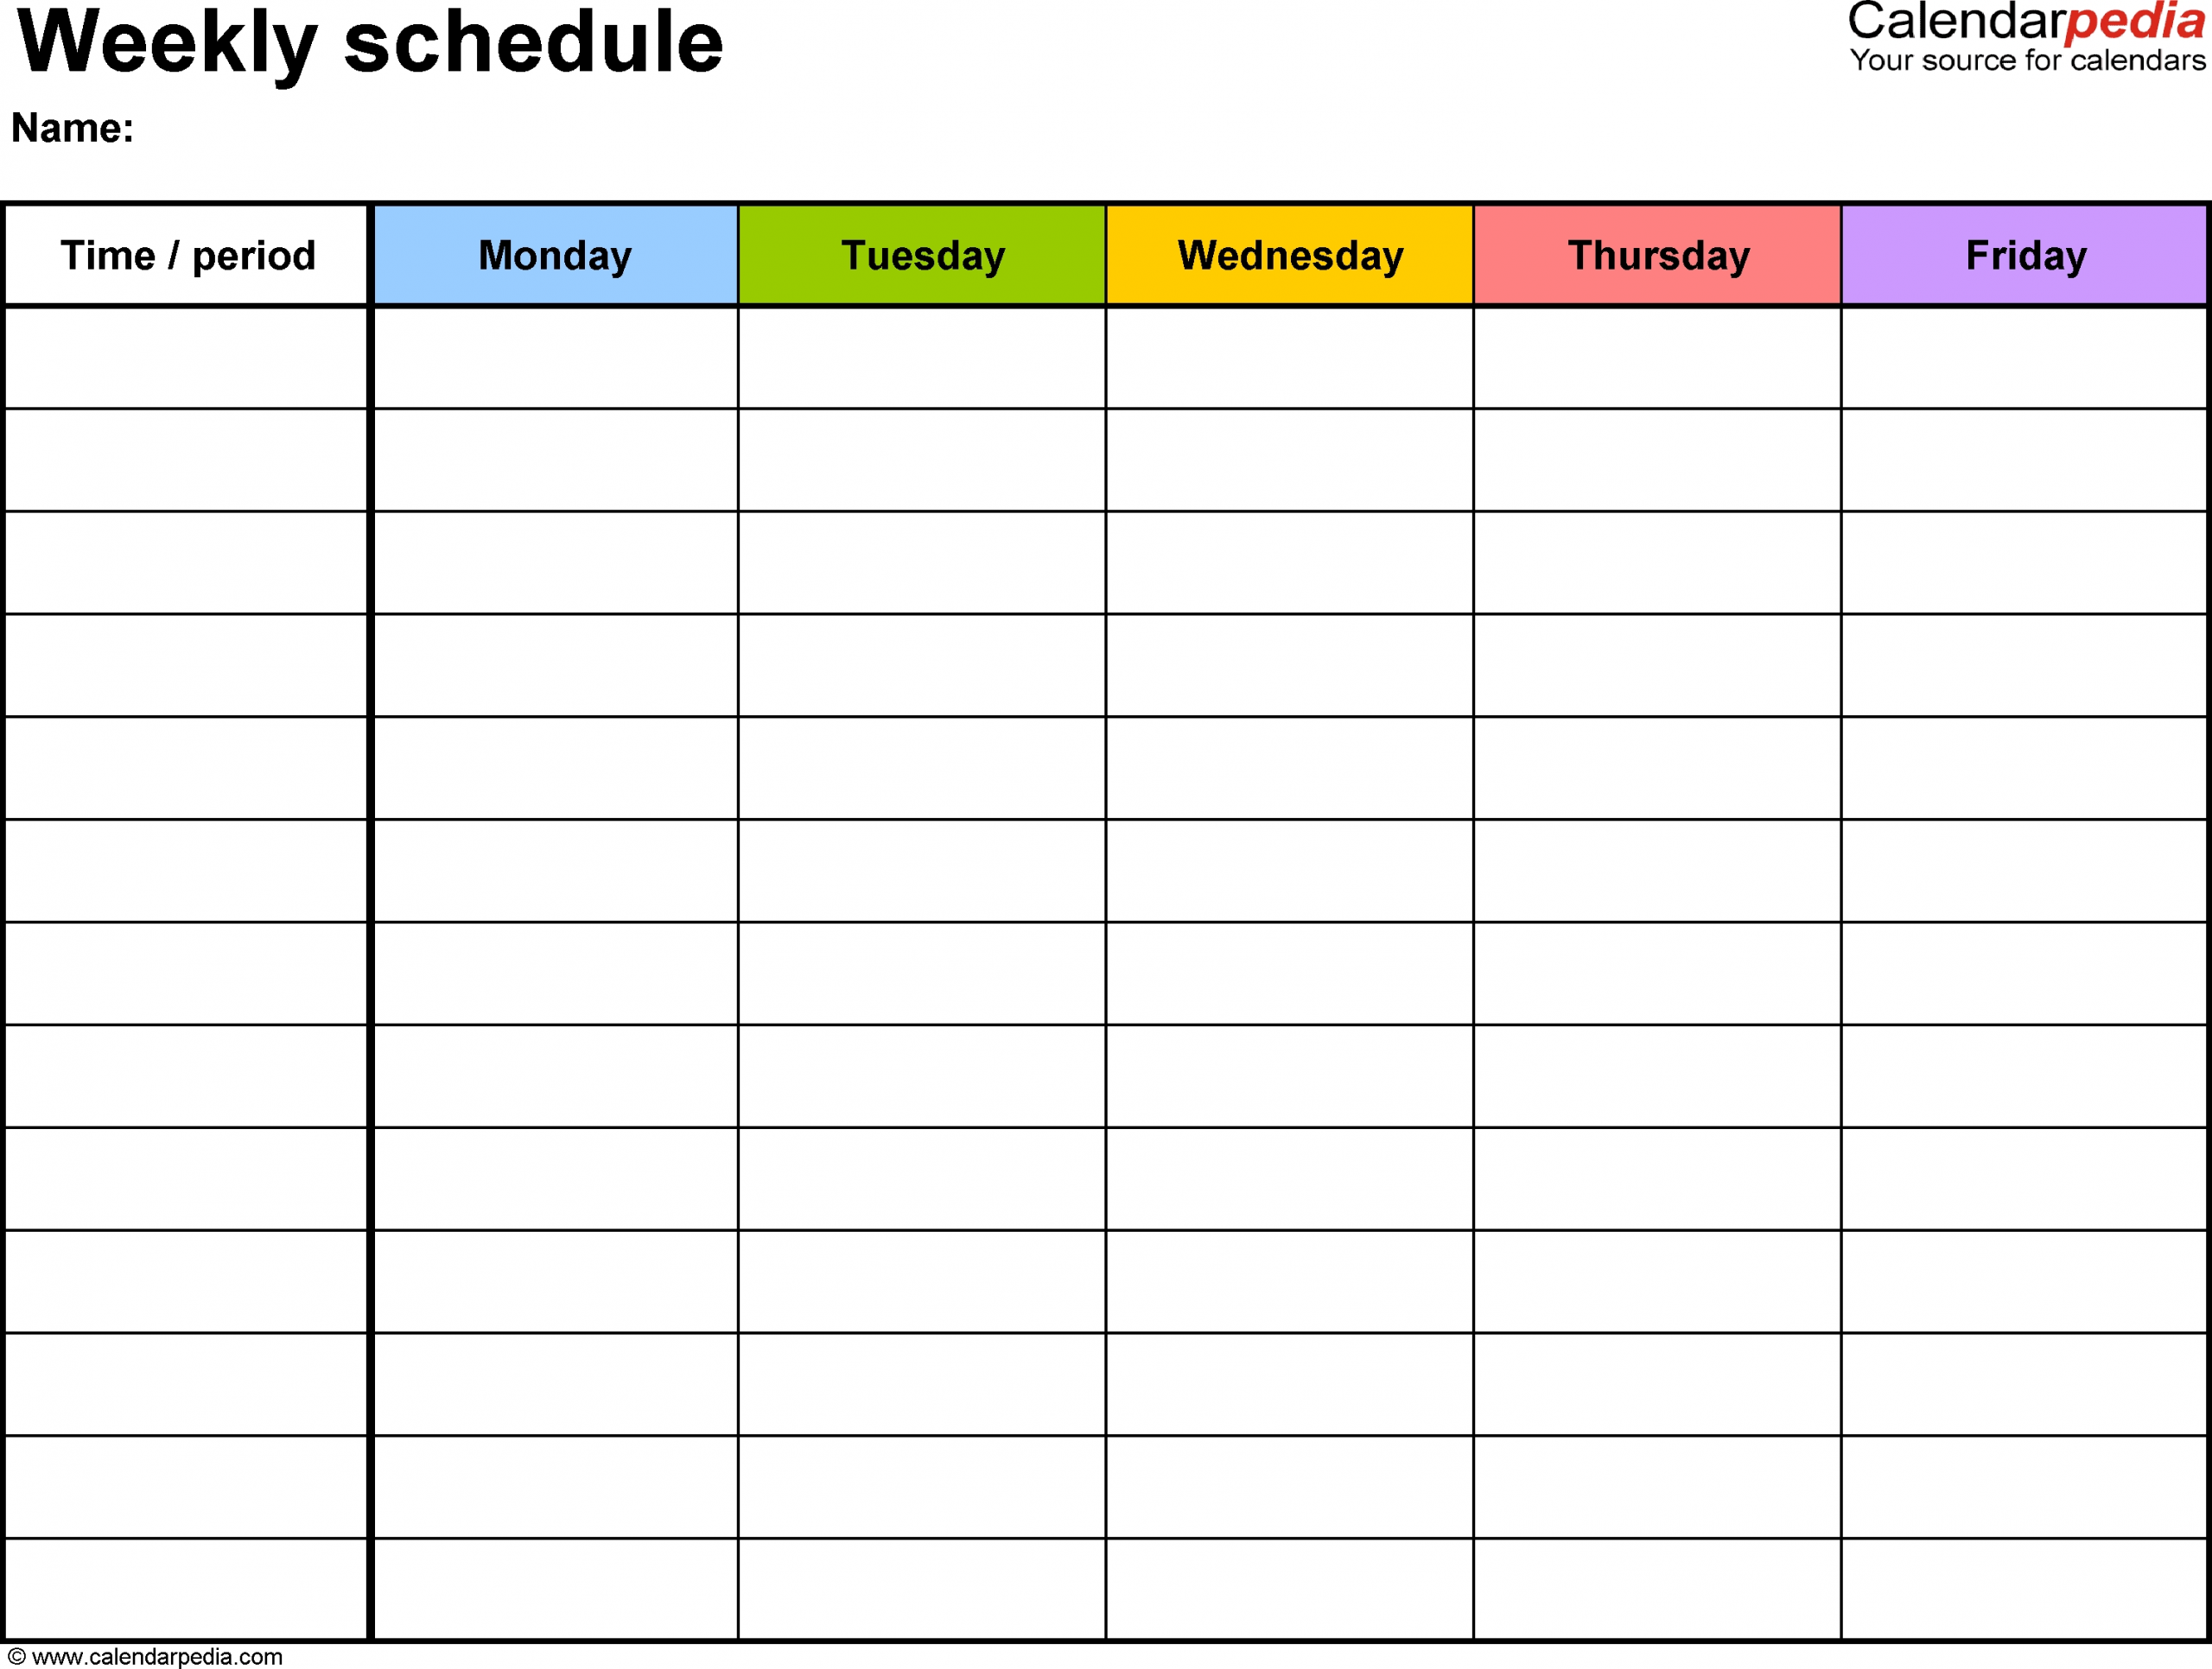 Free Weekly Schedule Templates For Word - 18 Templates inside Free Printable Blank Weekly Calendars